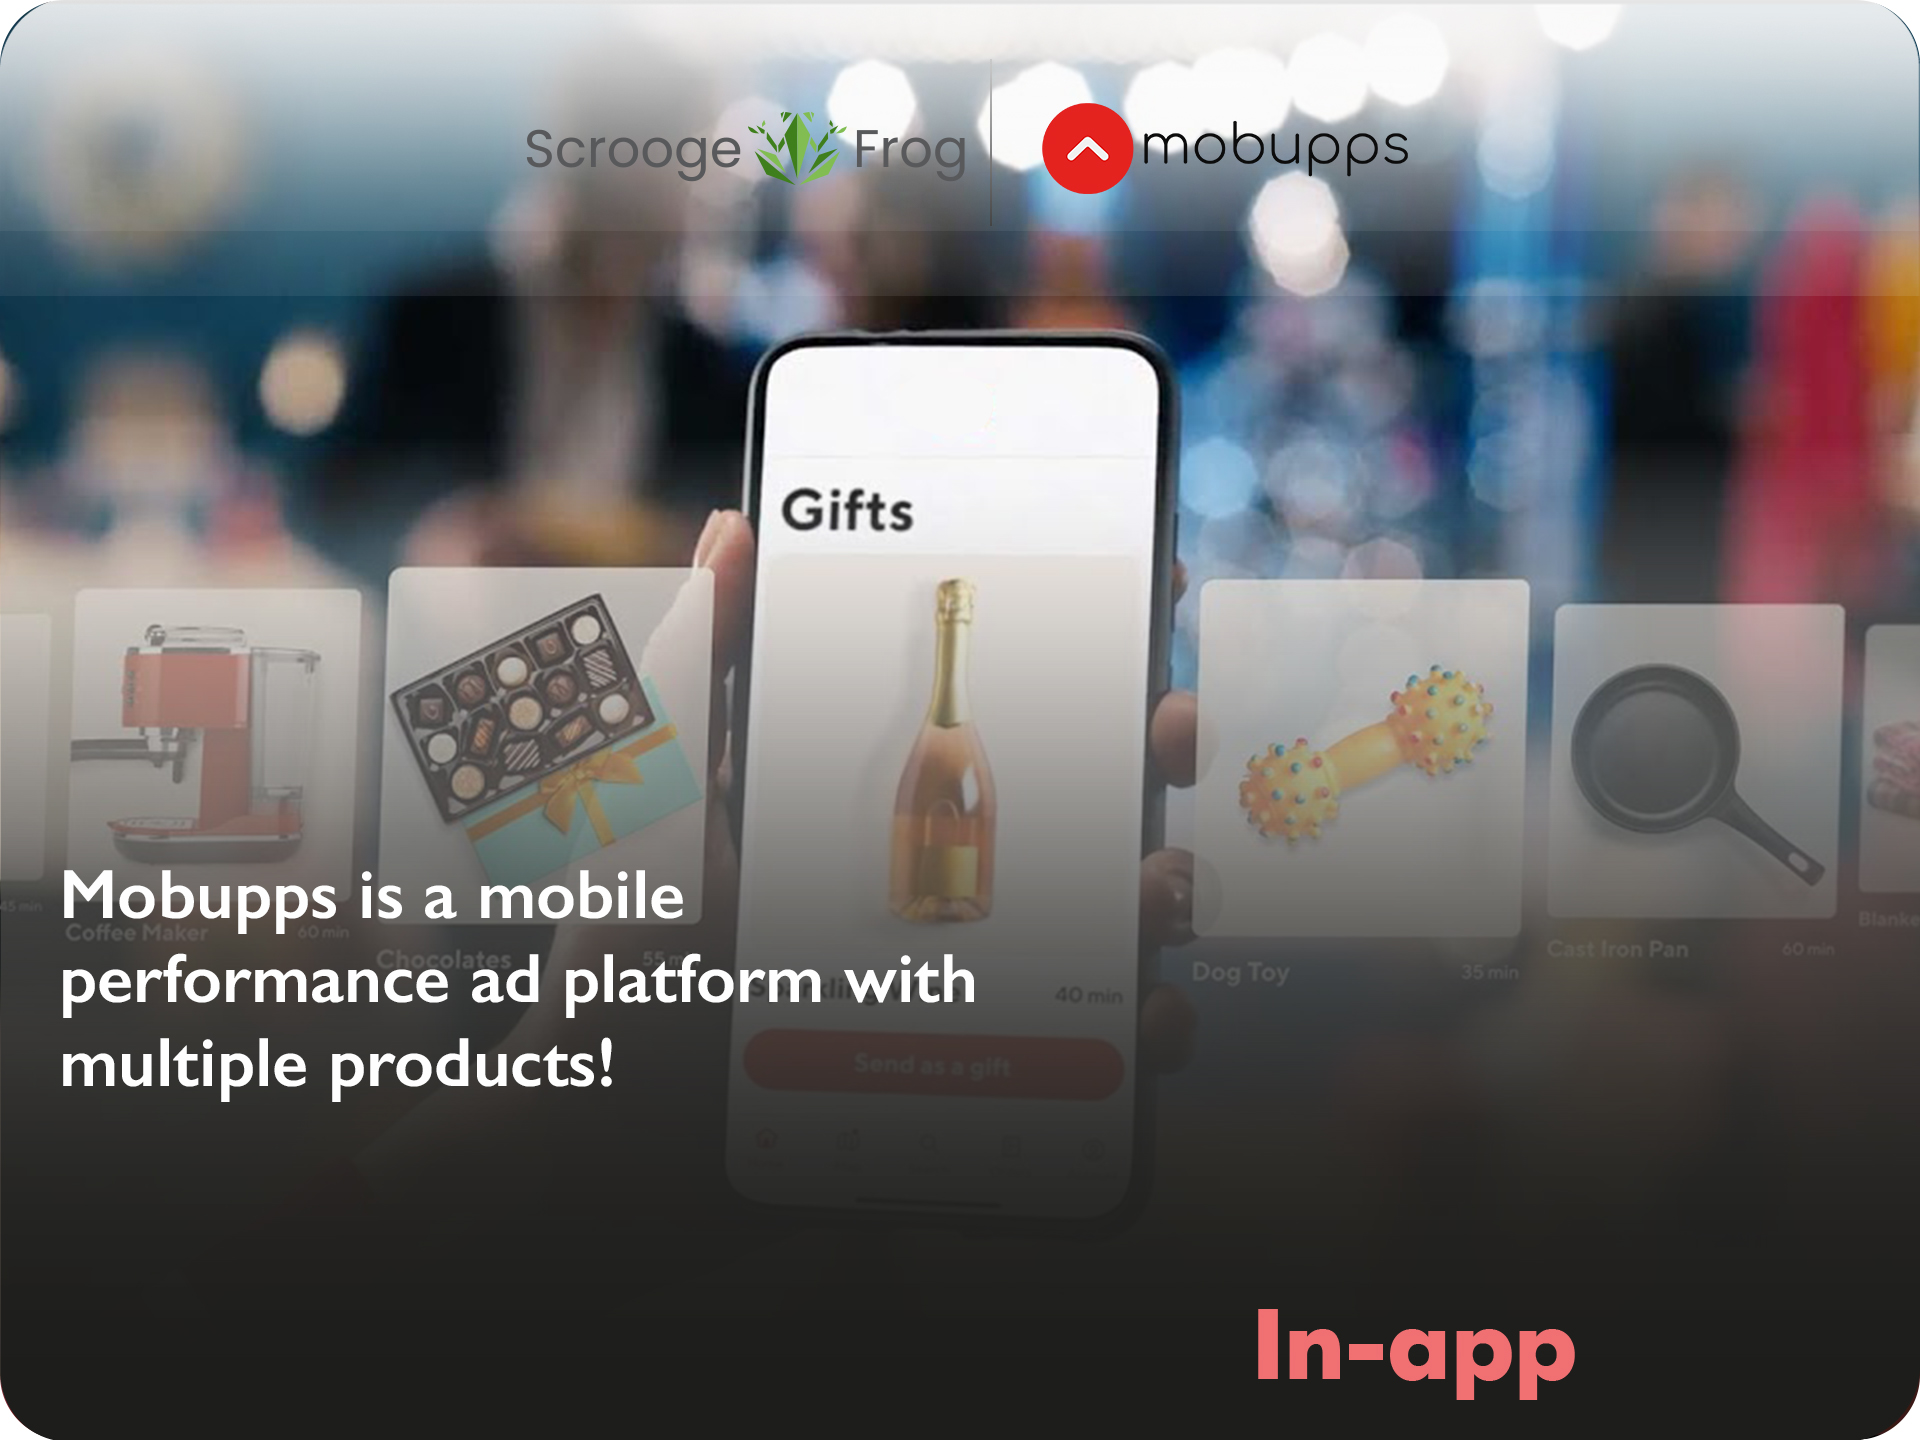 Mobupps is a mobile performance ad platform with multiple products!